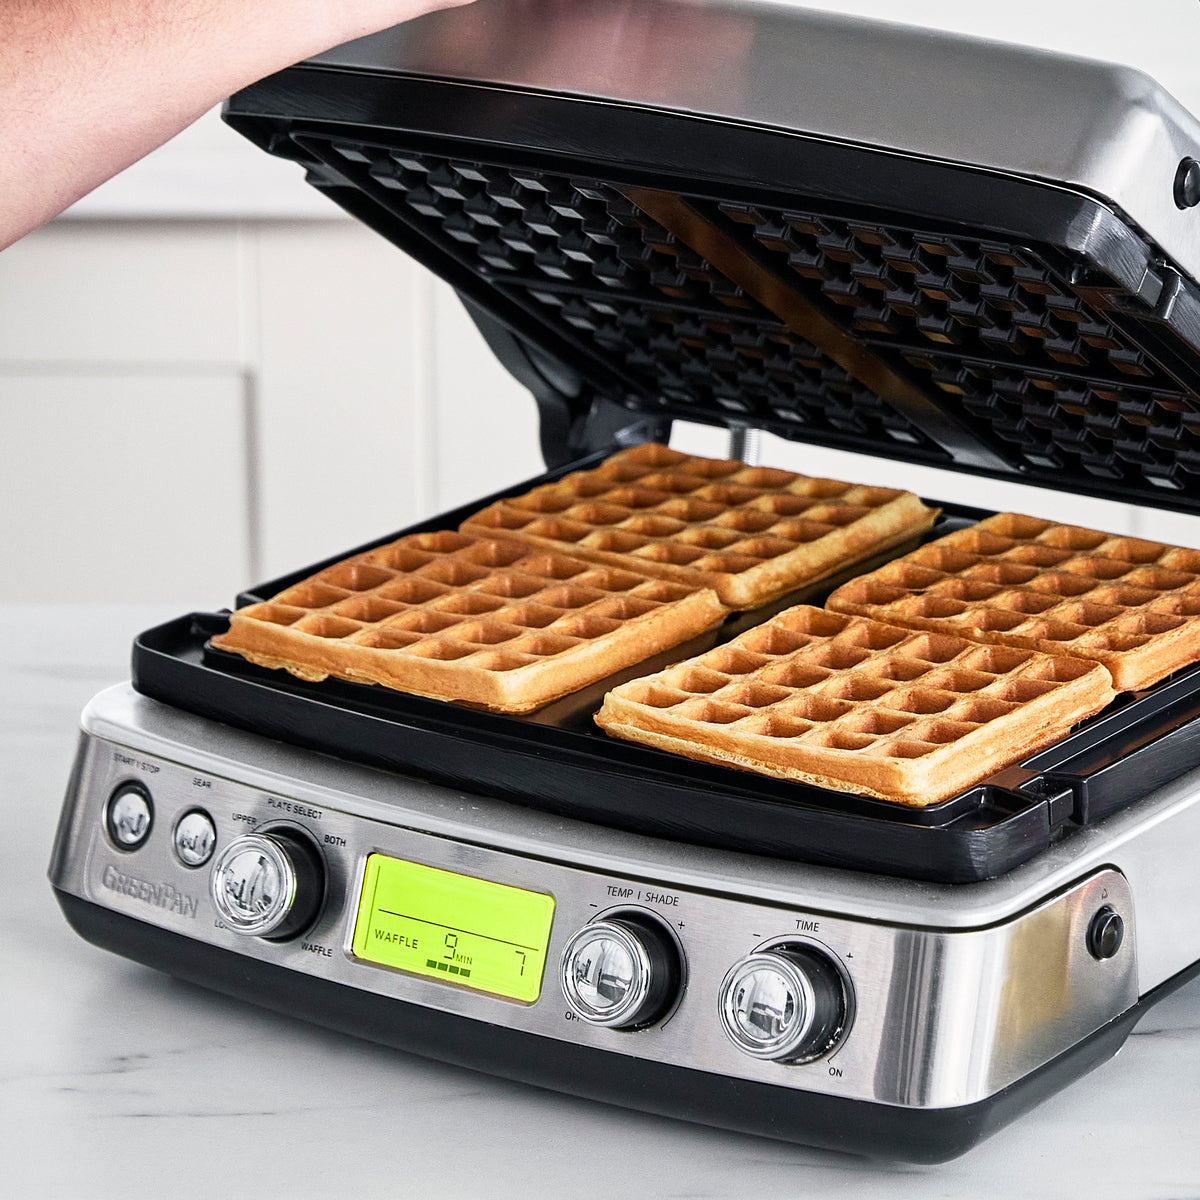 Healthy Non-Toxic PFAS Free Cookware - Elite Multi Grill, Griddle & Waffle Maker | Premiere Stainless Steel by GreenPan